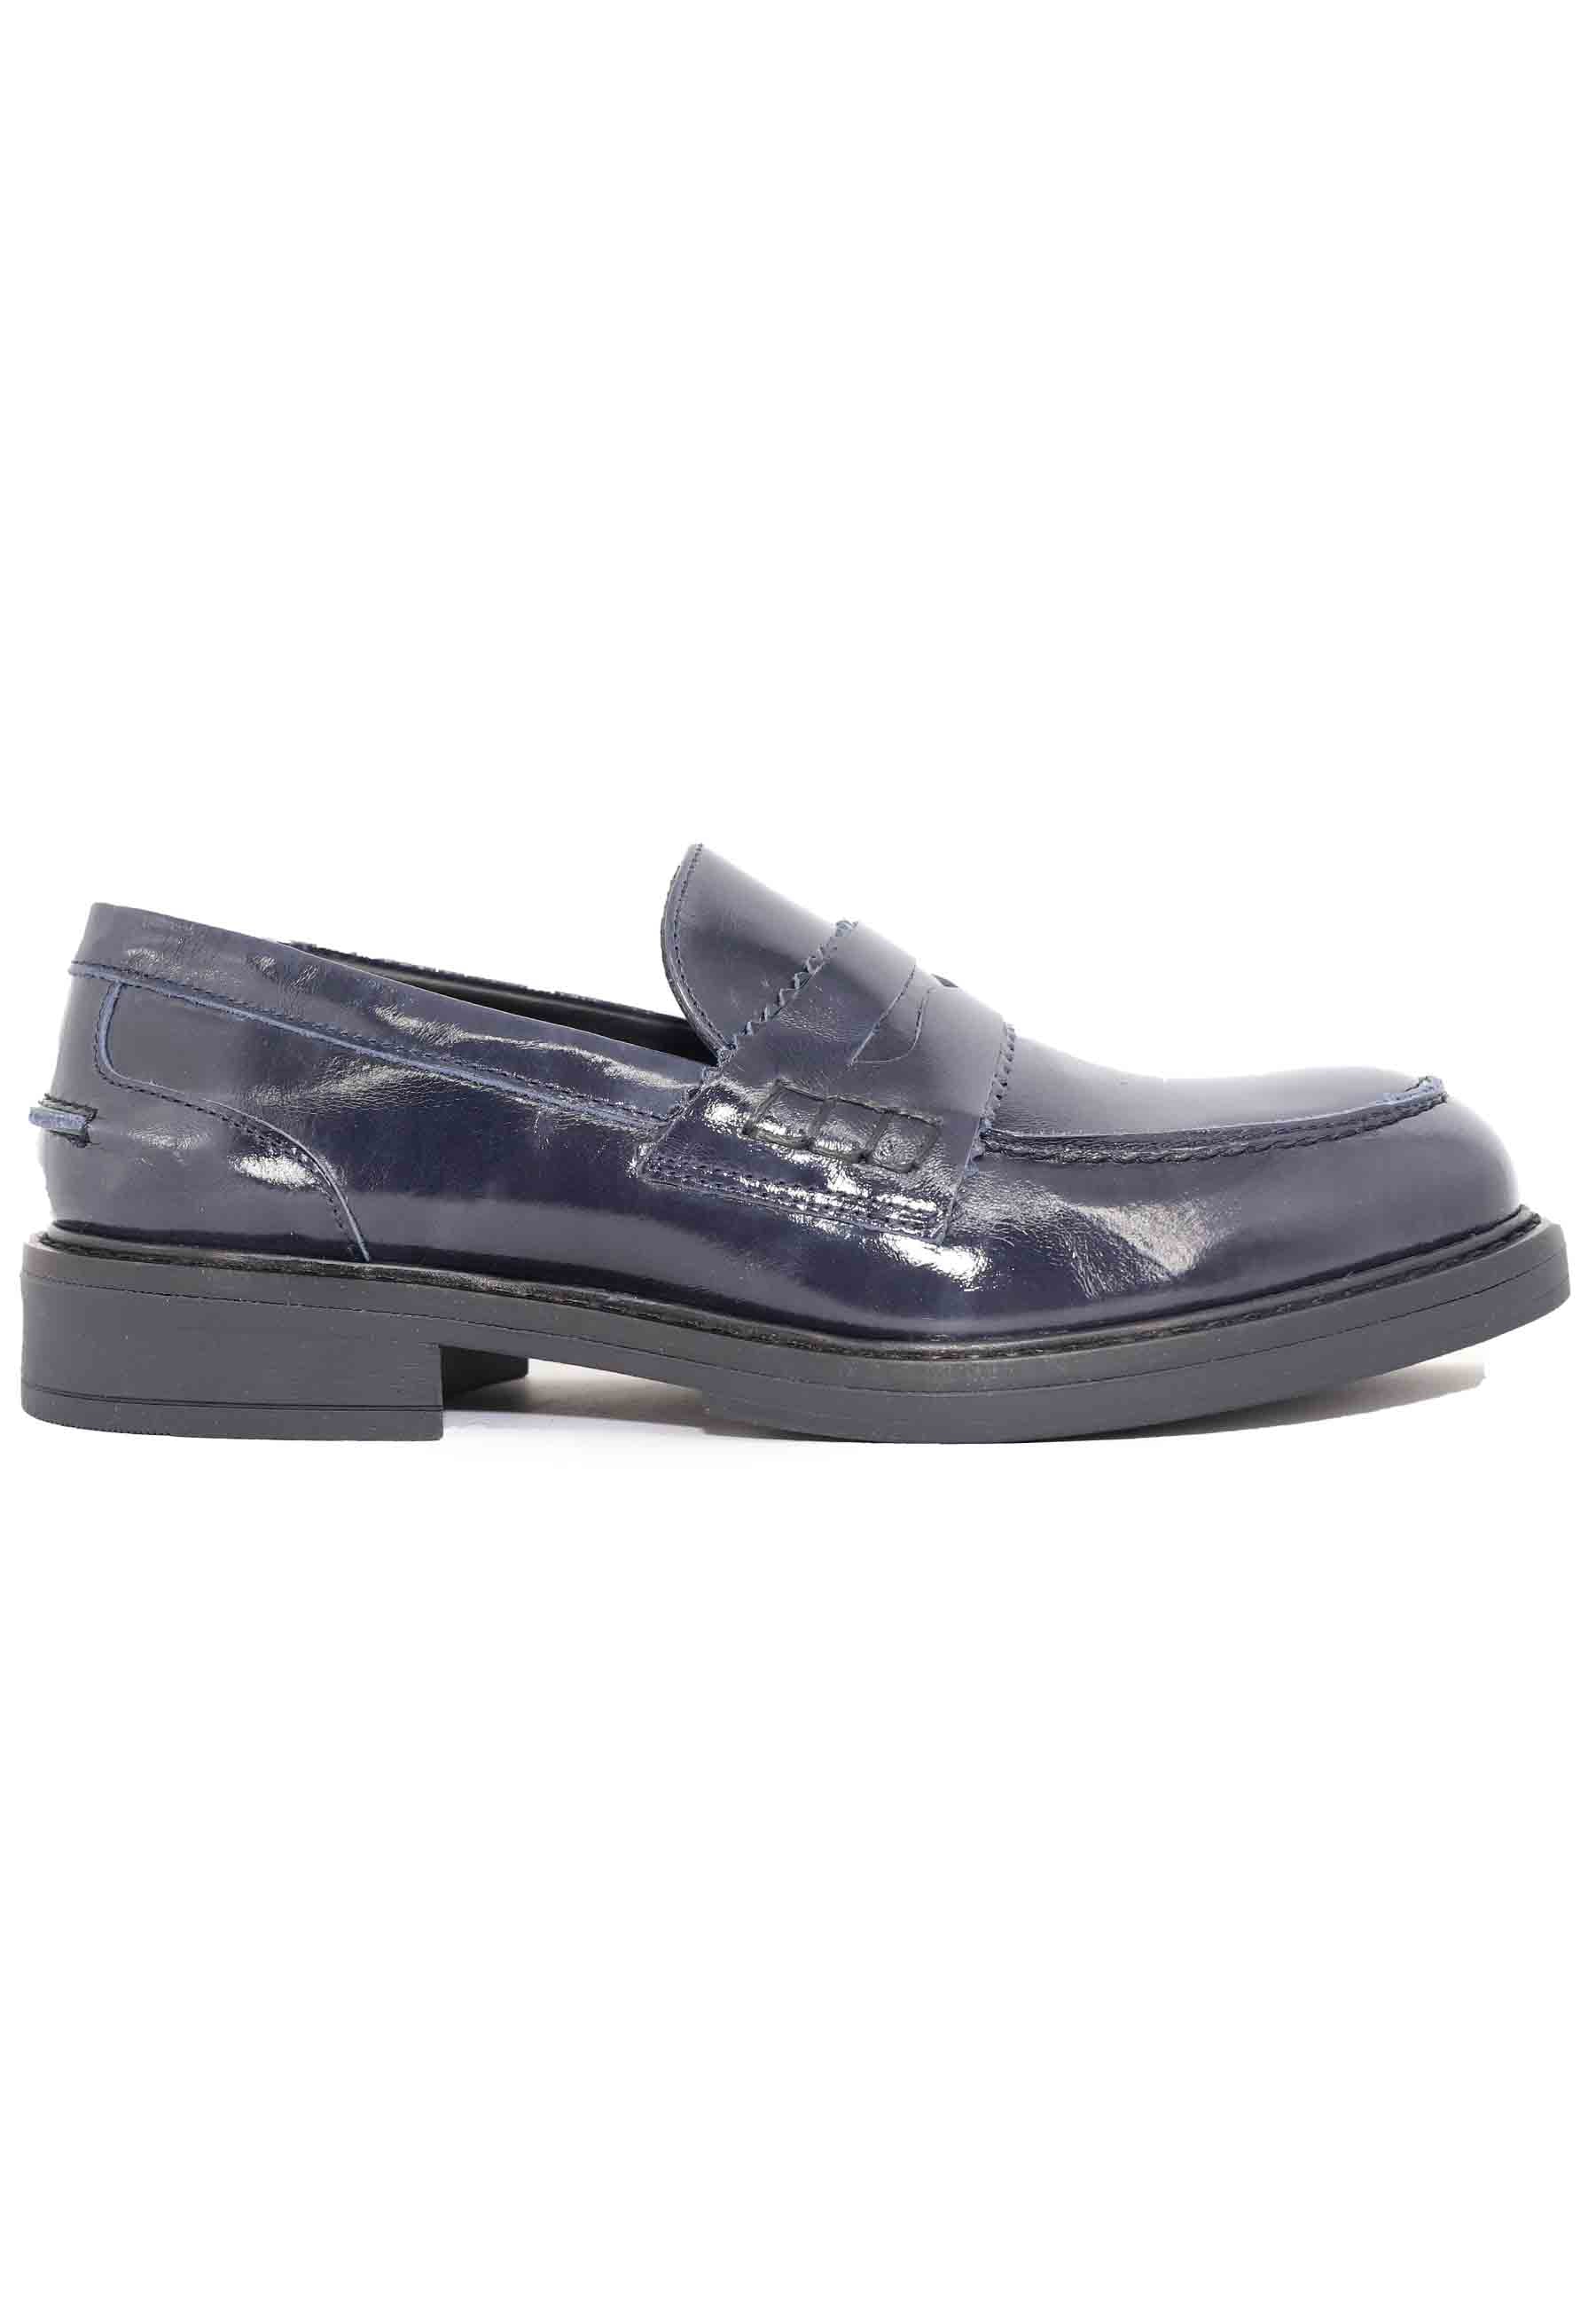 Women's moccasins in blue shiny leather with rubber sole